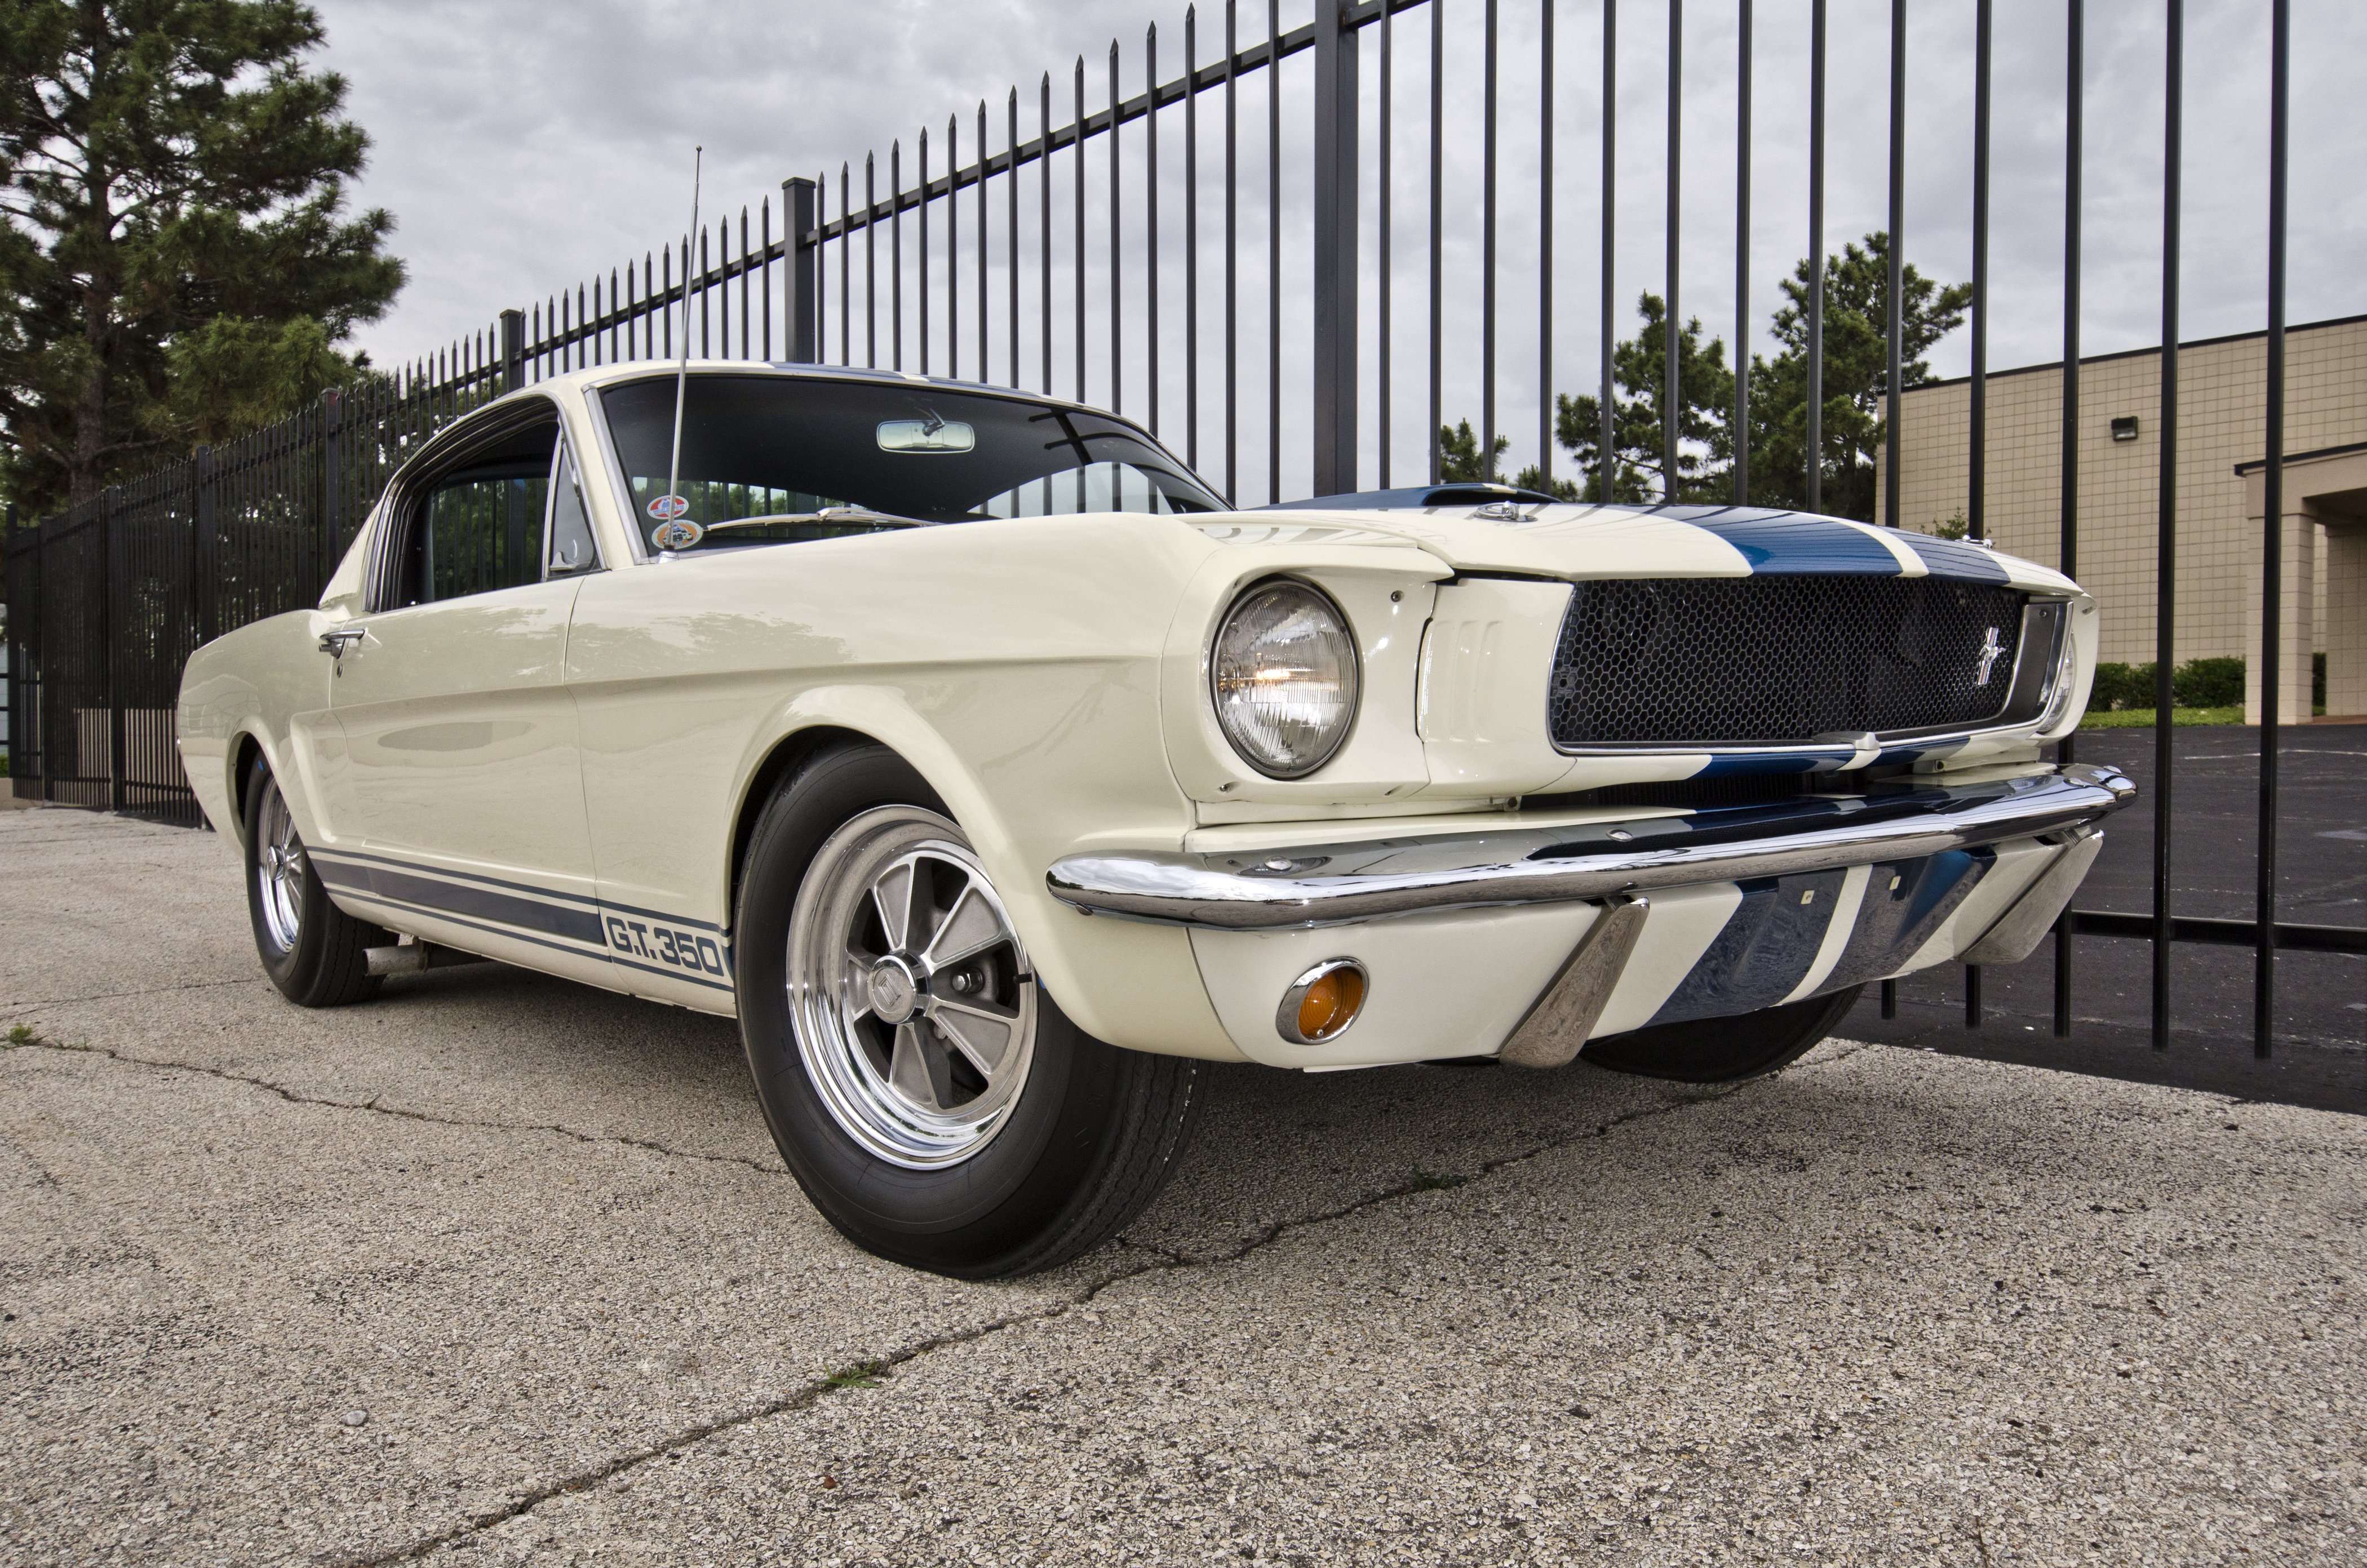 1965, Ford, Mustang, Shelby, Gt350, Fastback, Muscle, Classic, Usa, 4200x2790 10 Wallpaper